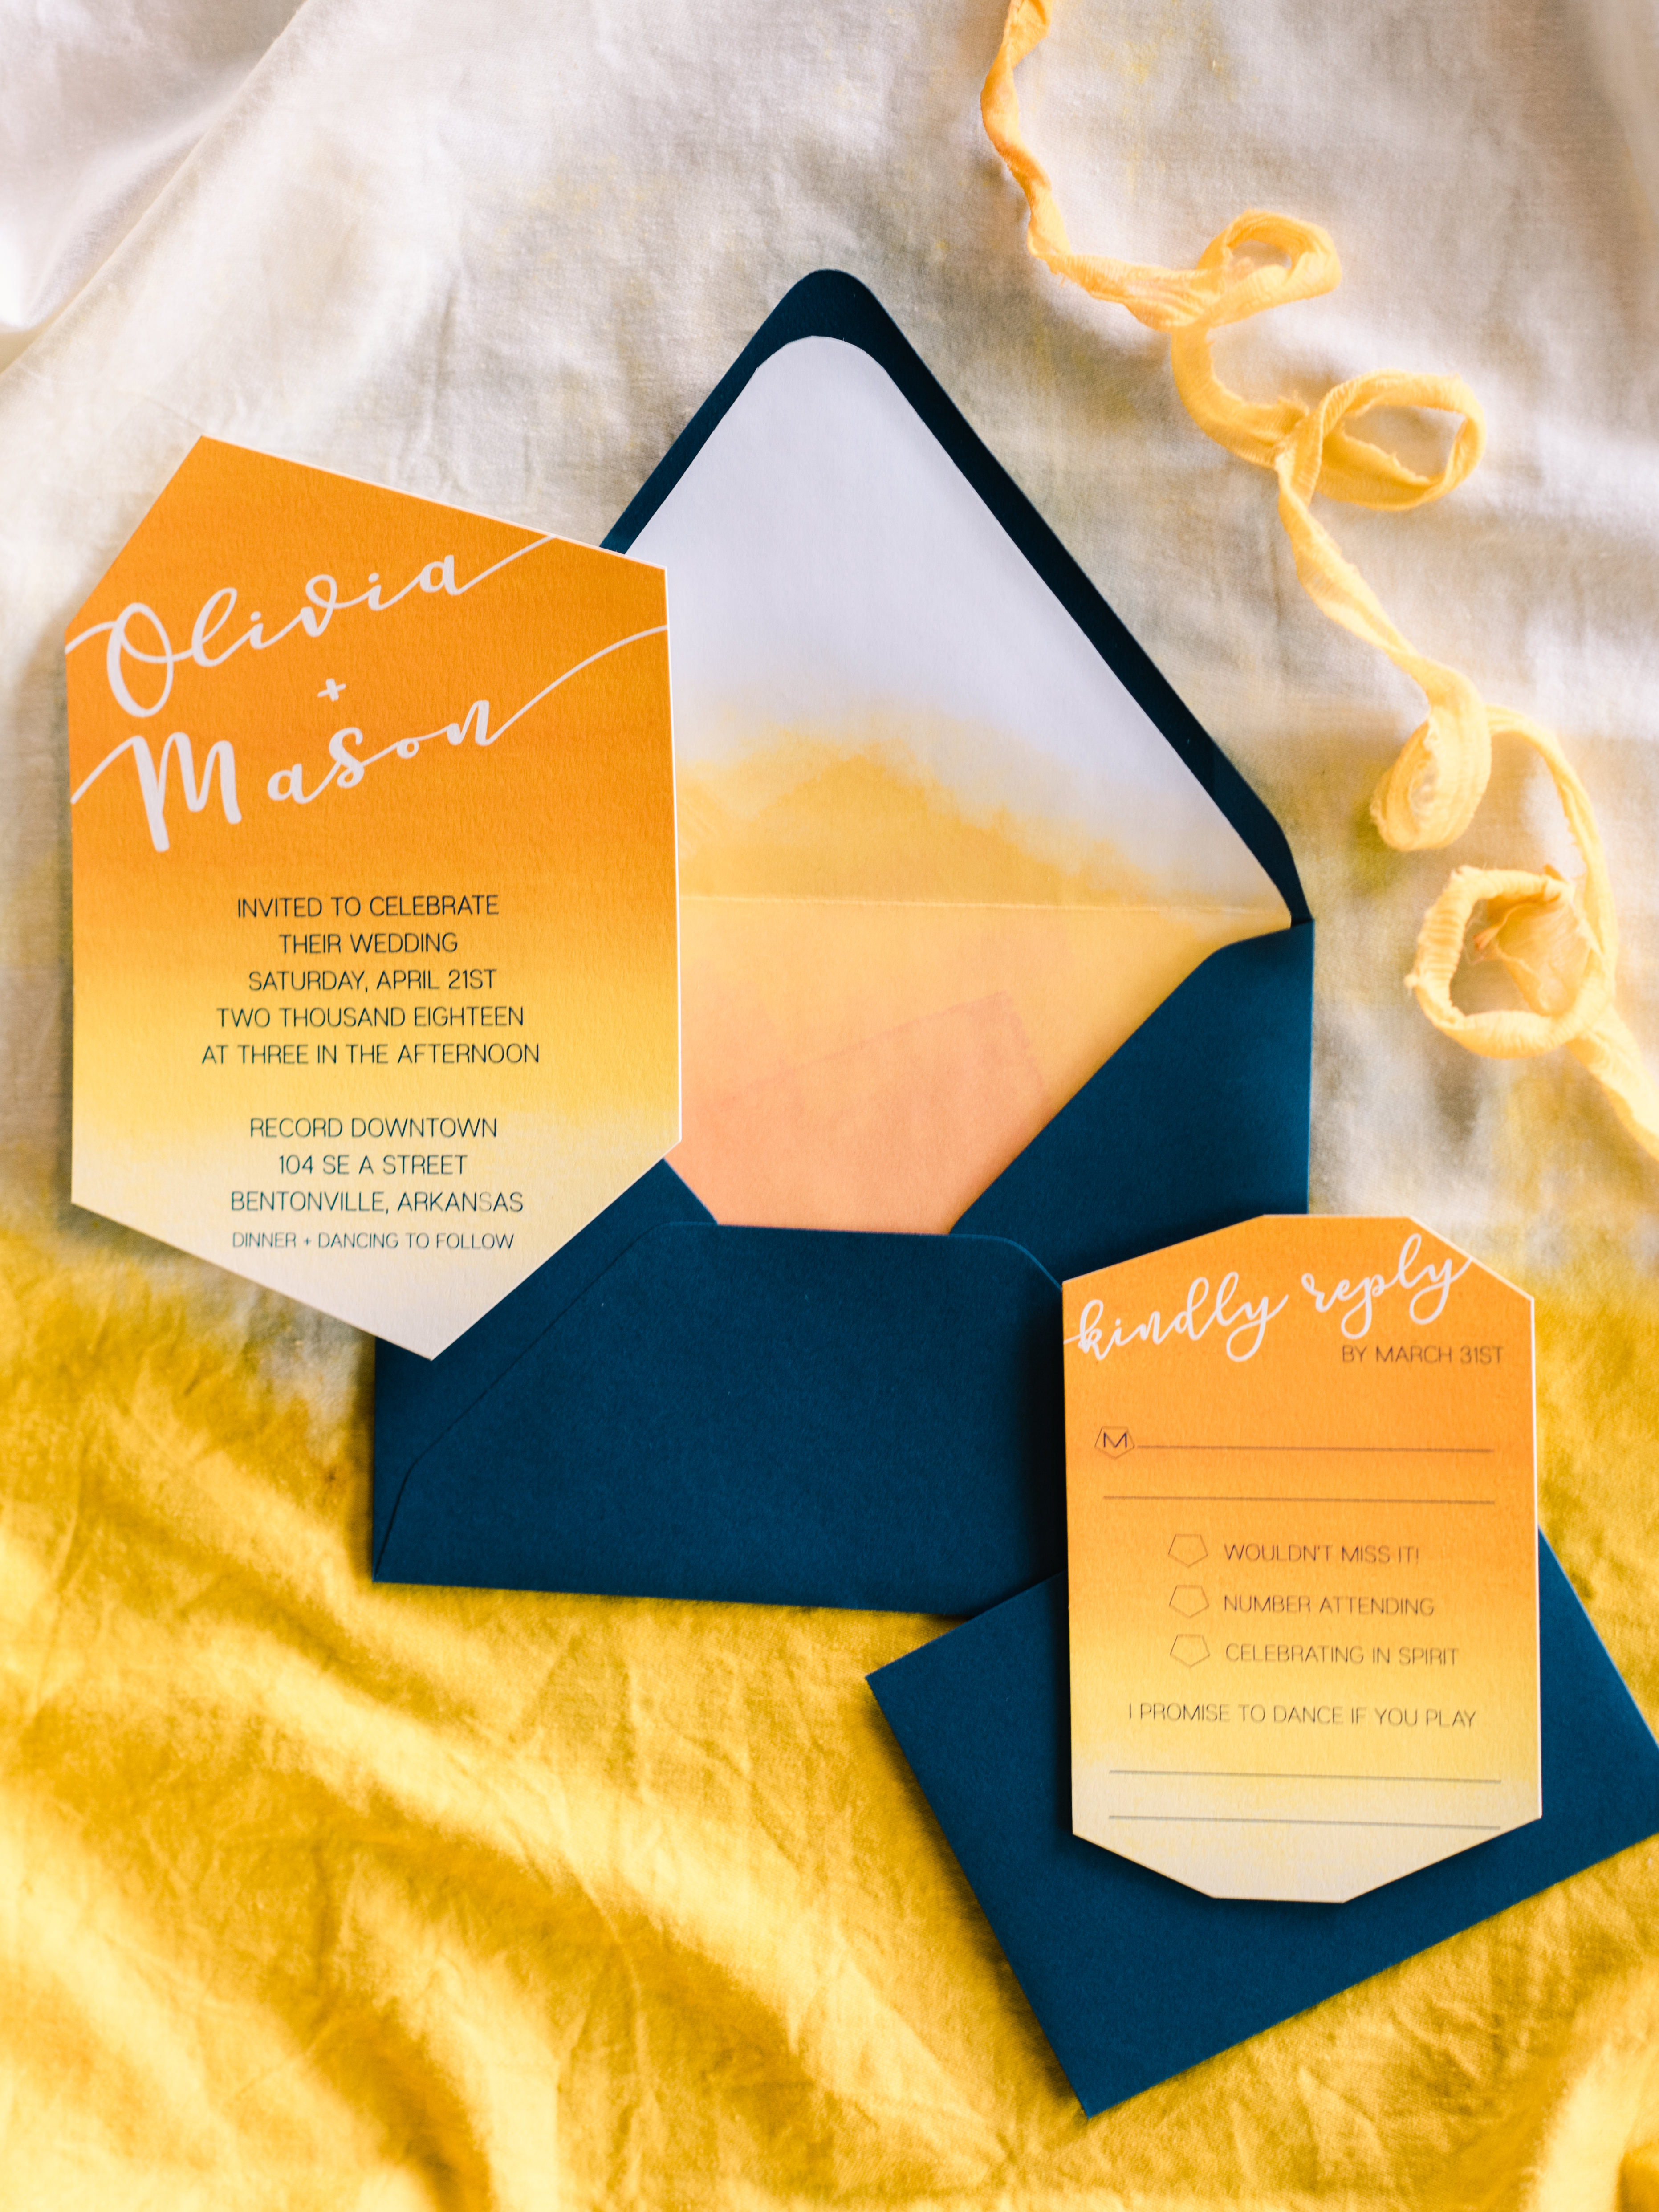 Yellow and blue invitations made by Tram Colwin in Fayetteville Arkansas